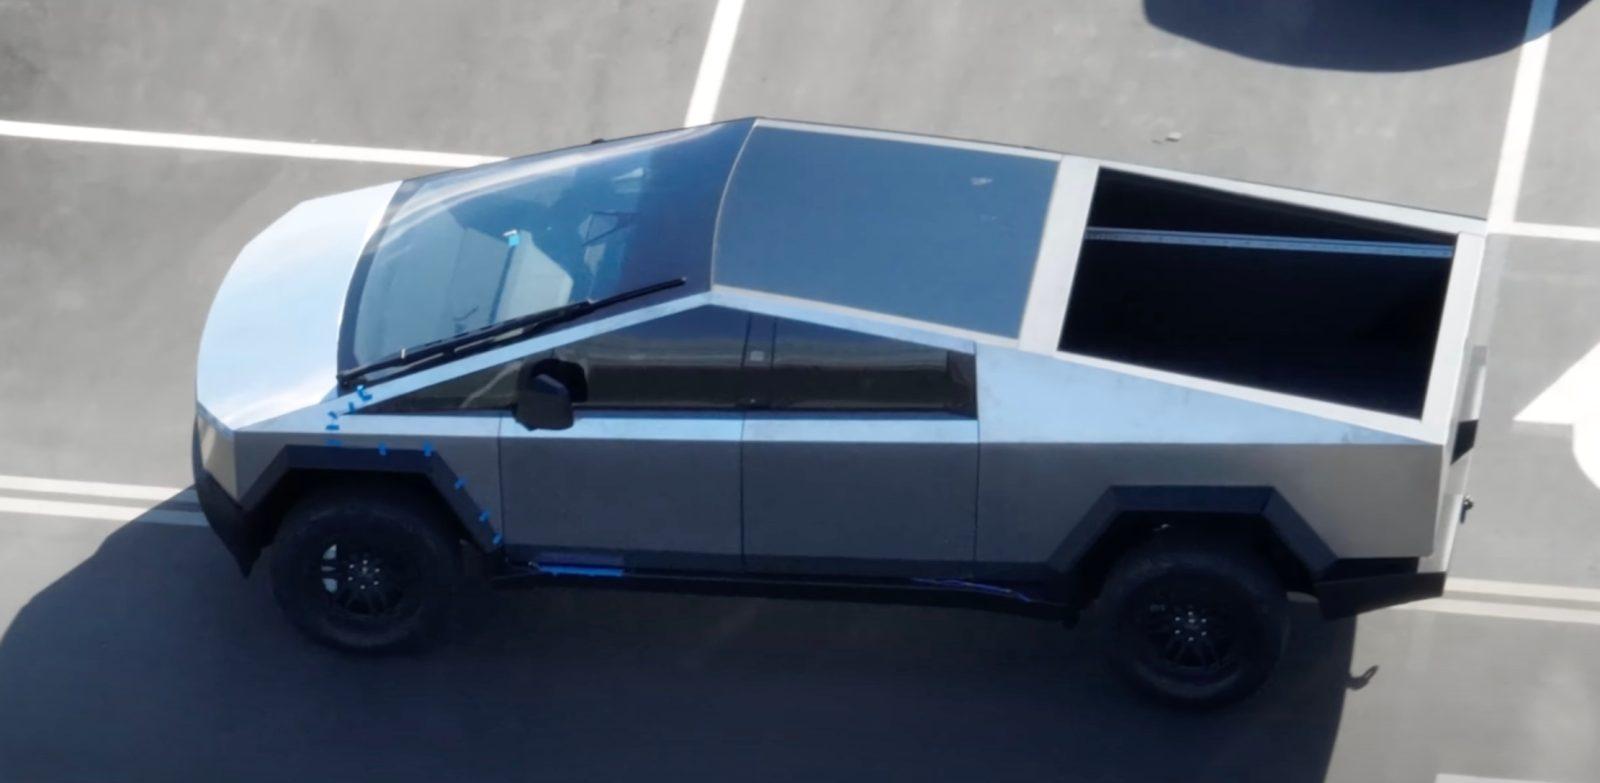 Tesla Cybertruck With Updated Design Spotted On Test Track Electrek